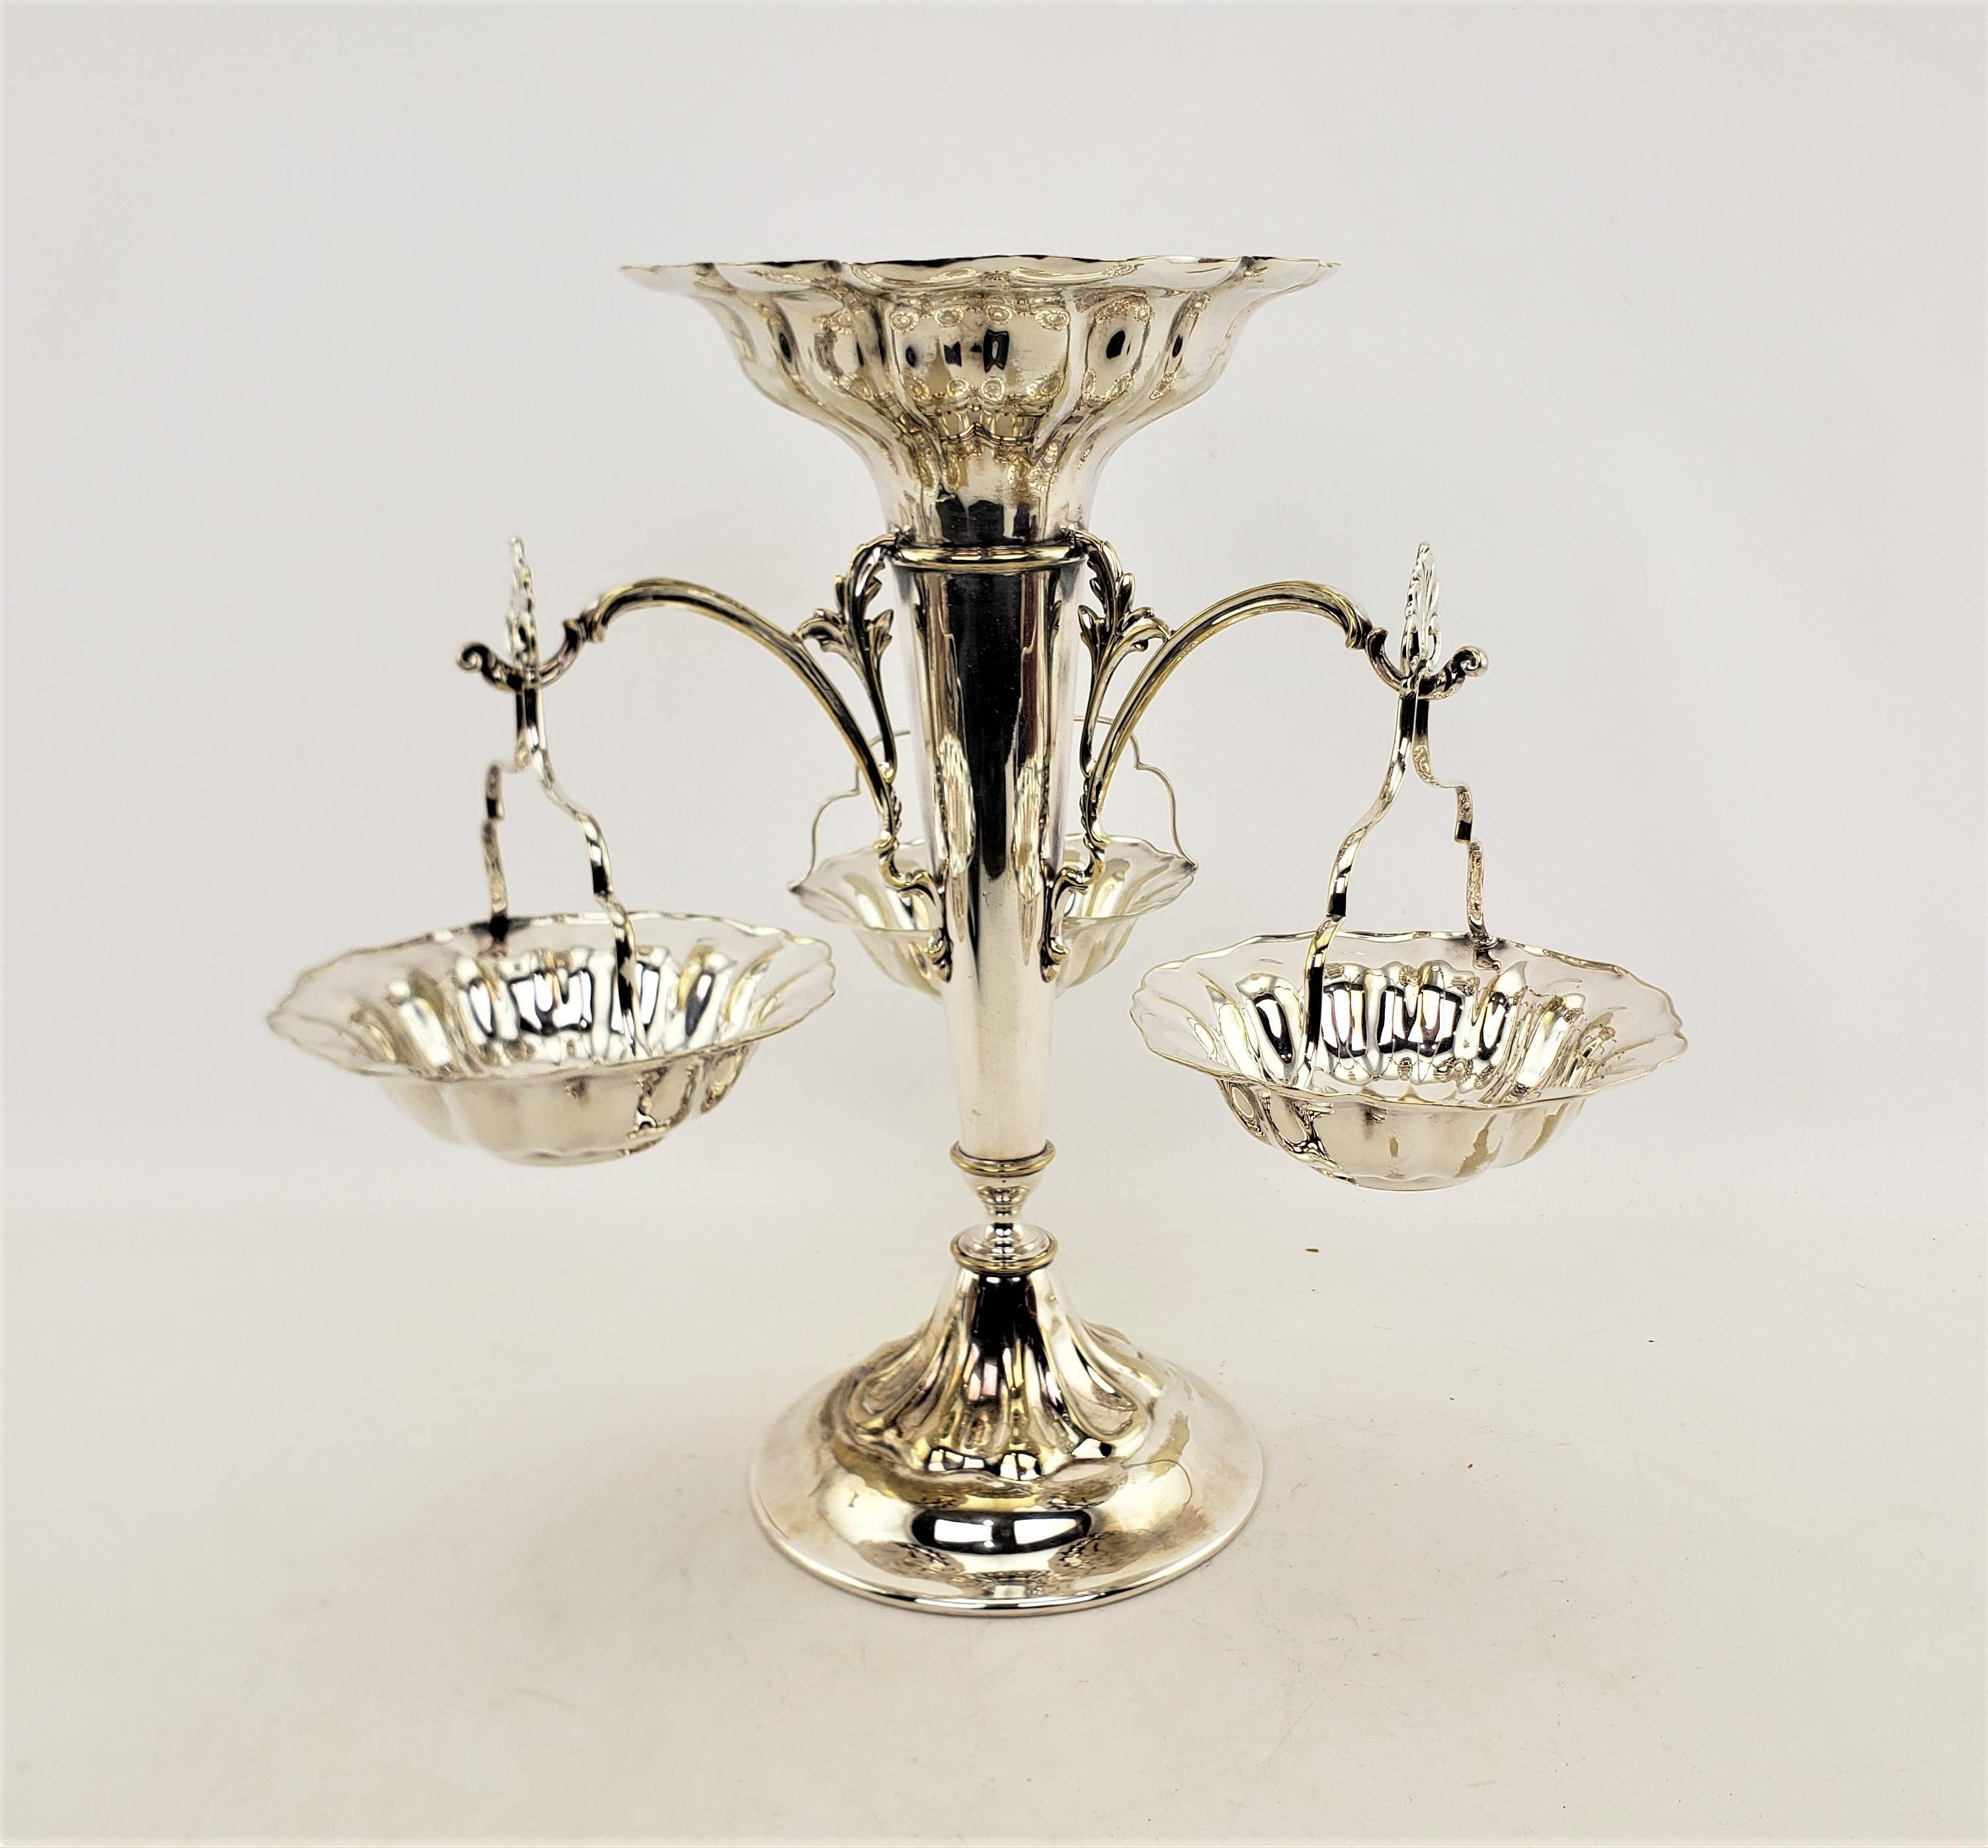 Machine-Made Antique English Elkington Silver Plated Epergne or Centerpiece with Side Baskets For Sale